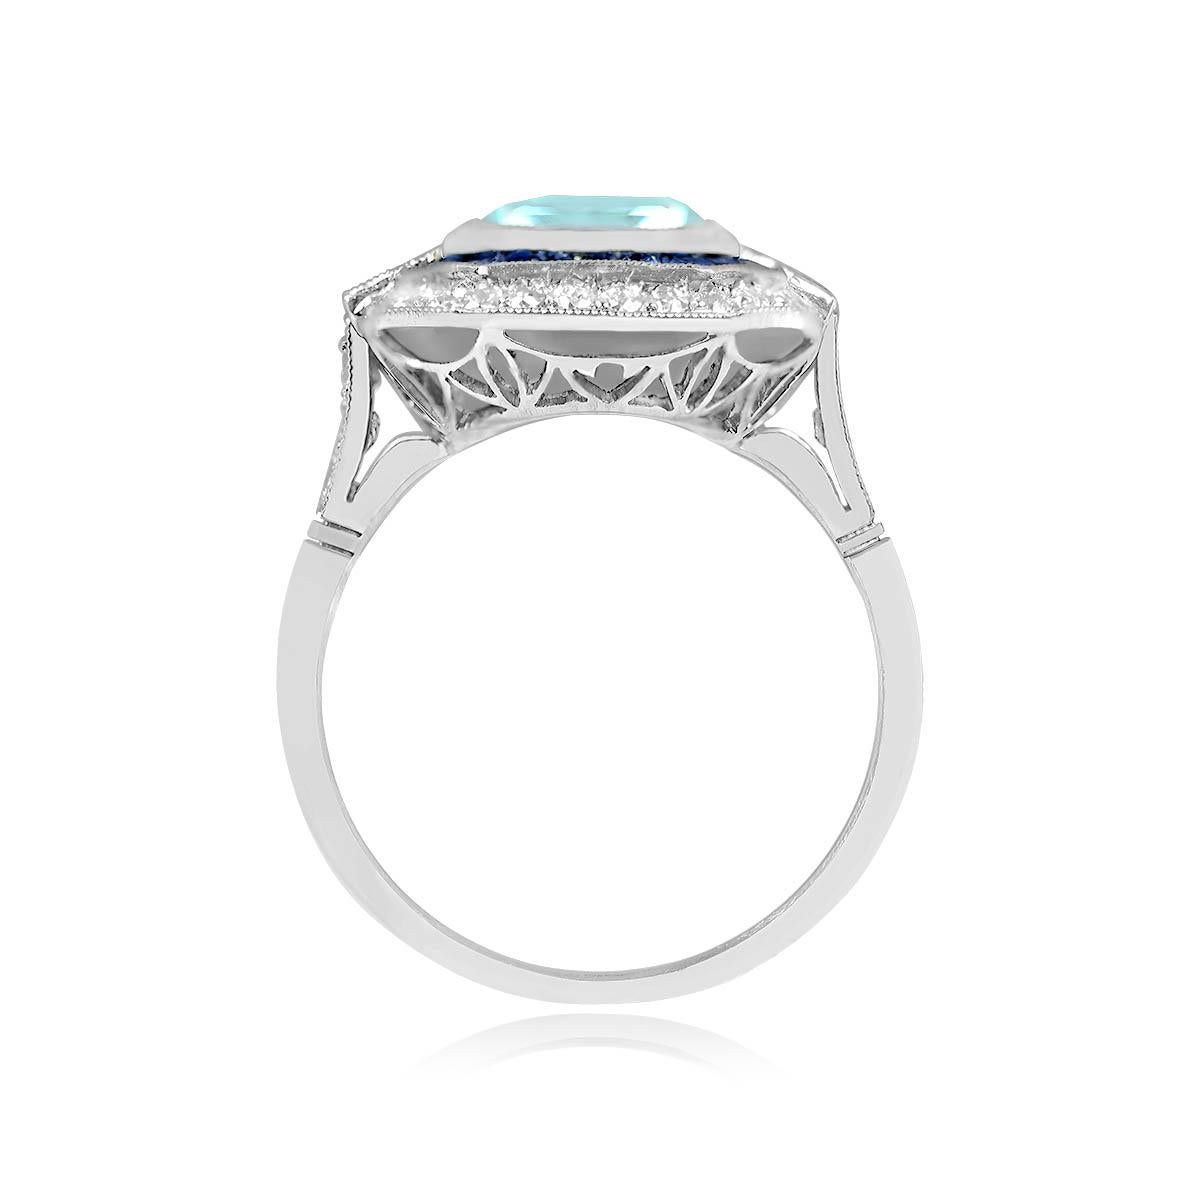 2.78ct Emerald Cut Natural Aquamarine Cocktail Ring, Double Halo, Platinum In Excellent Condition For Sale In New York, NY